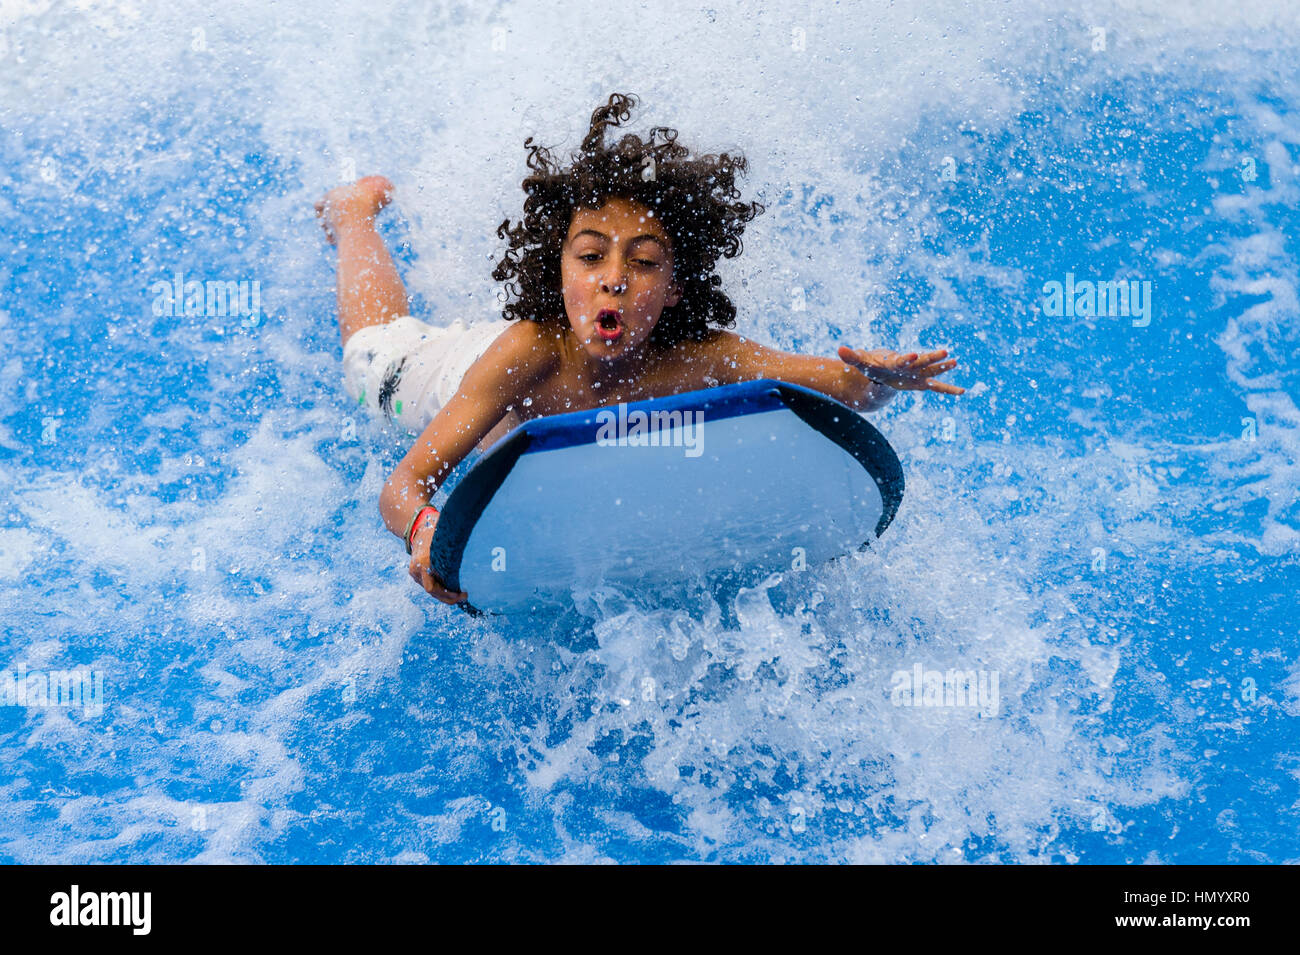 A boy rides a bodyboard on a artificial wave machine at a swimming pool. Stock Photo